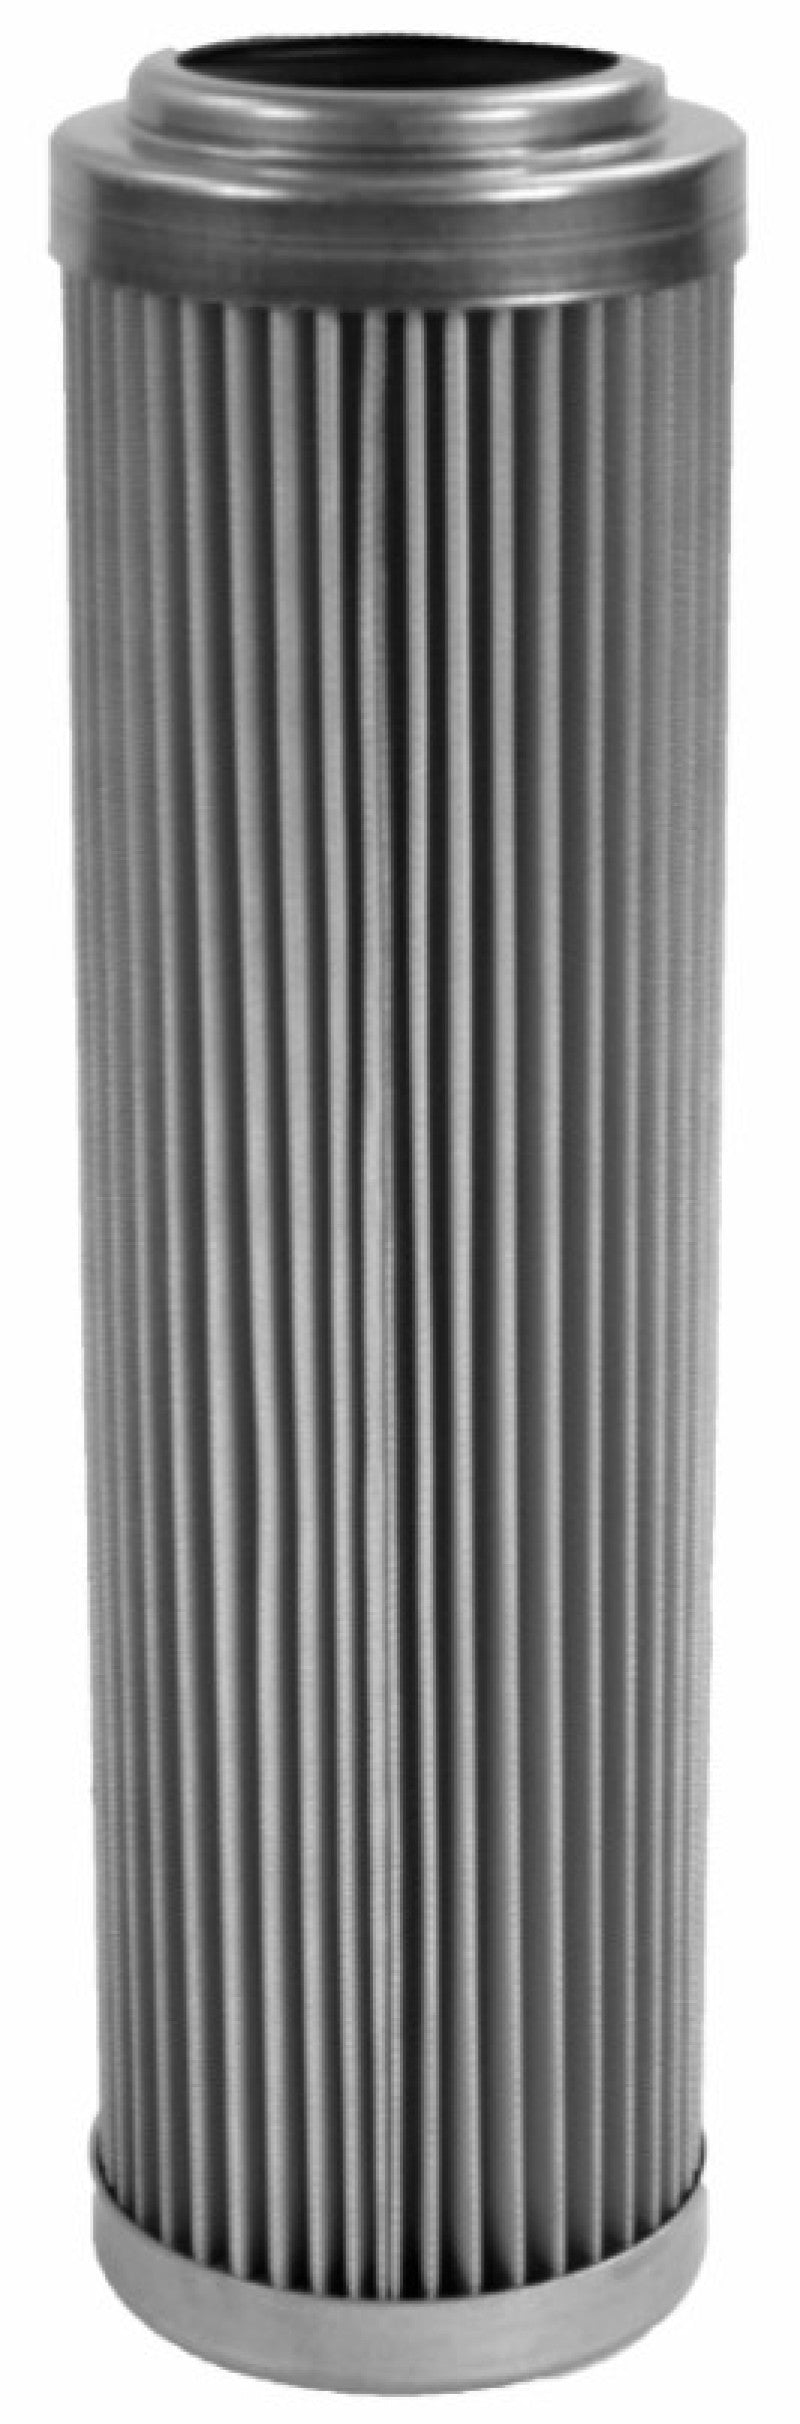 Aeromotive Filter Element 40 micron Stainless Steel - Fits 12363